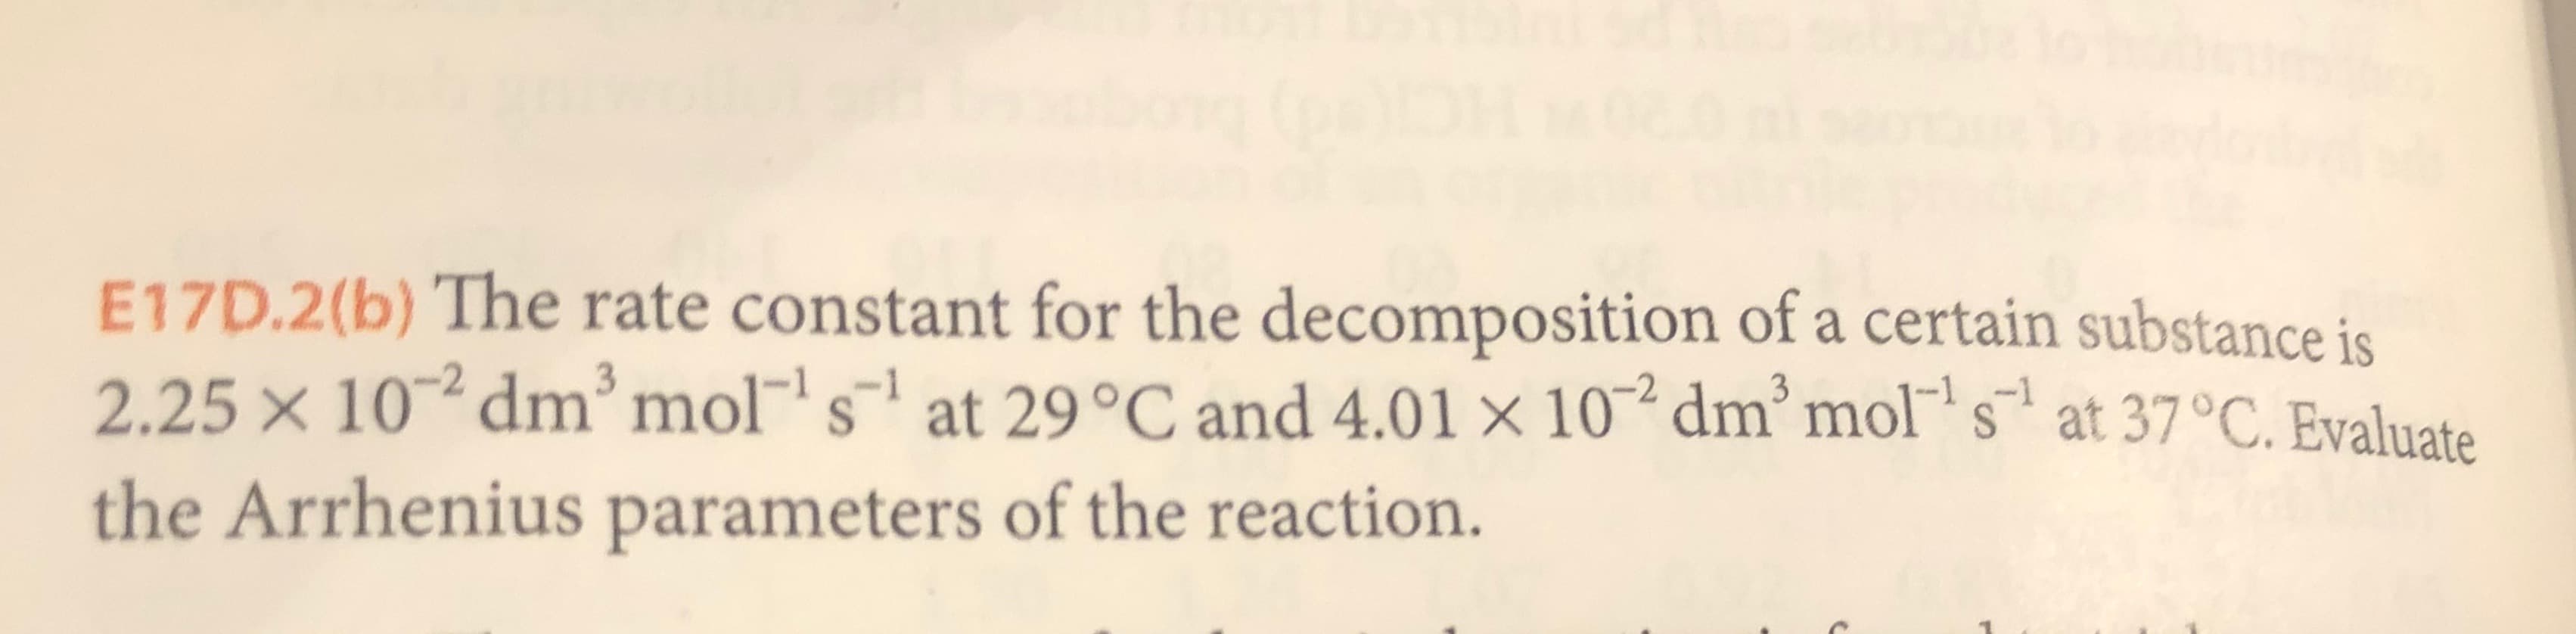 E17D.2(b) The rate constant for the decomposition of a certain substance is
2.25 x 10 dm' mol s at 29 °C and 4.01 x 10 dm'mols at 37°C. Evaluate
3
the Arrhenius parameters of the reaction.
